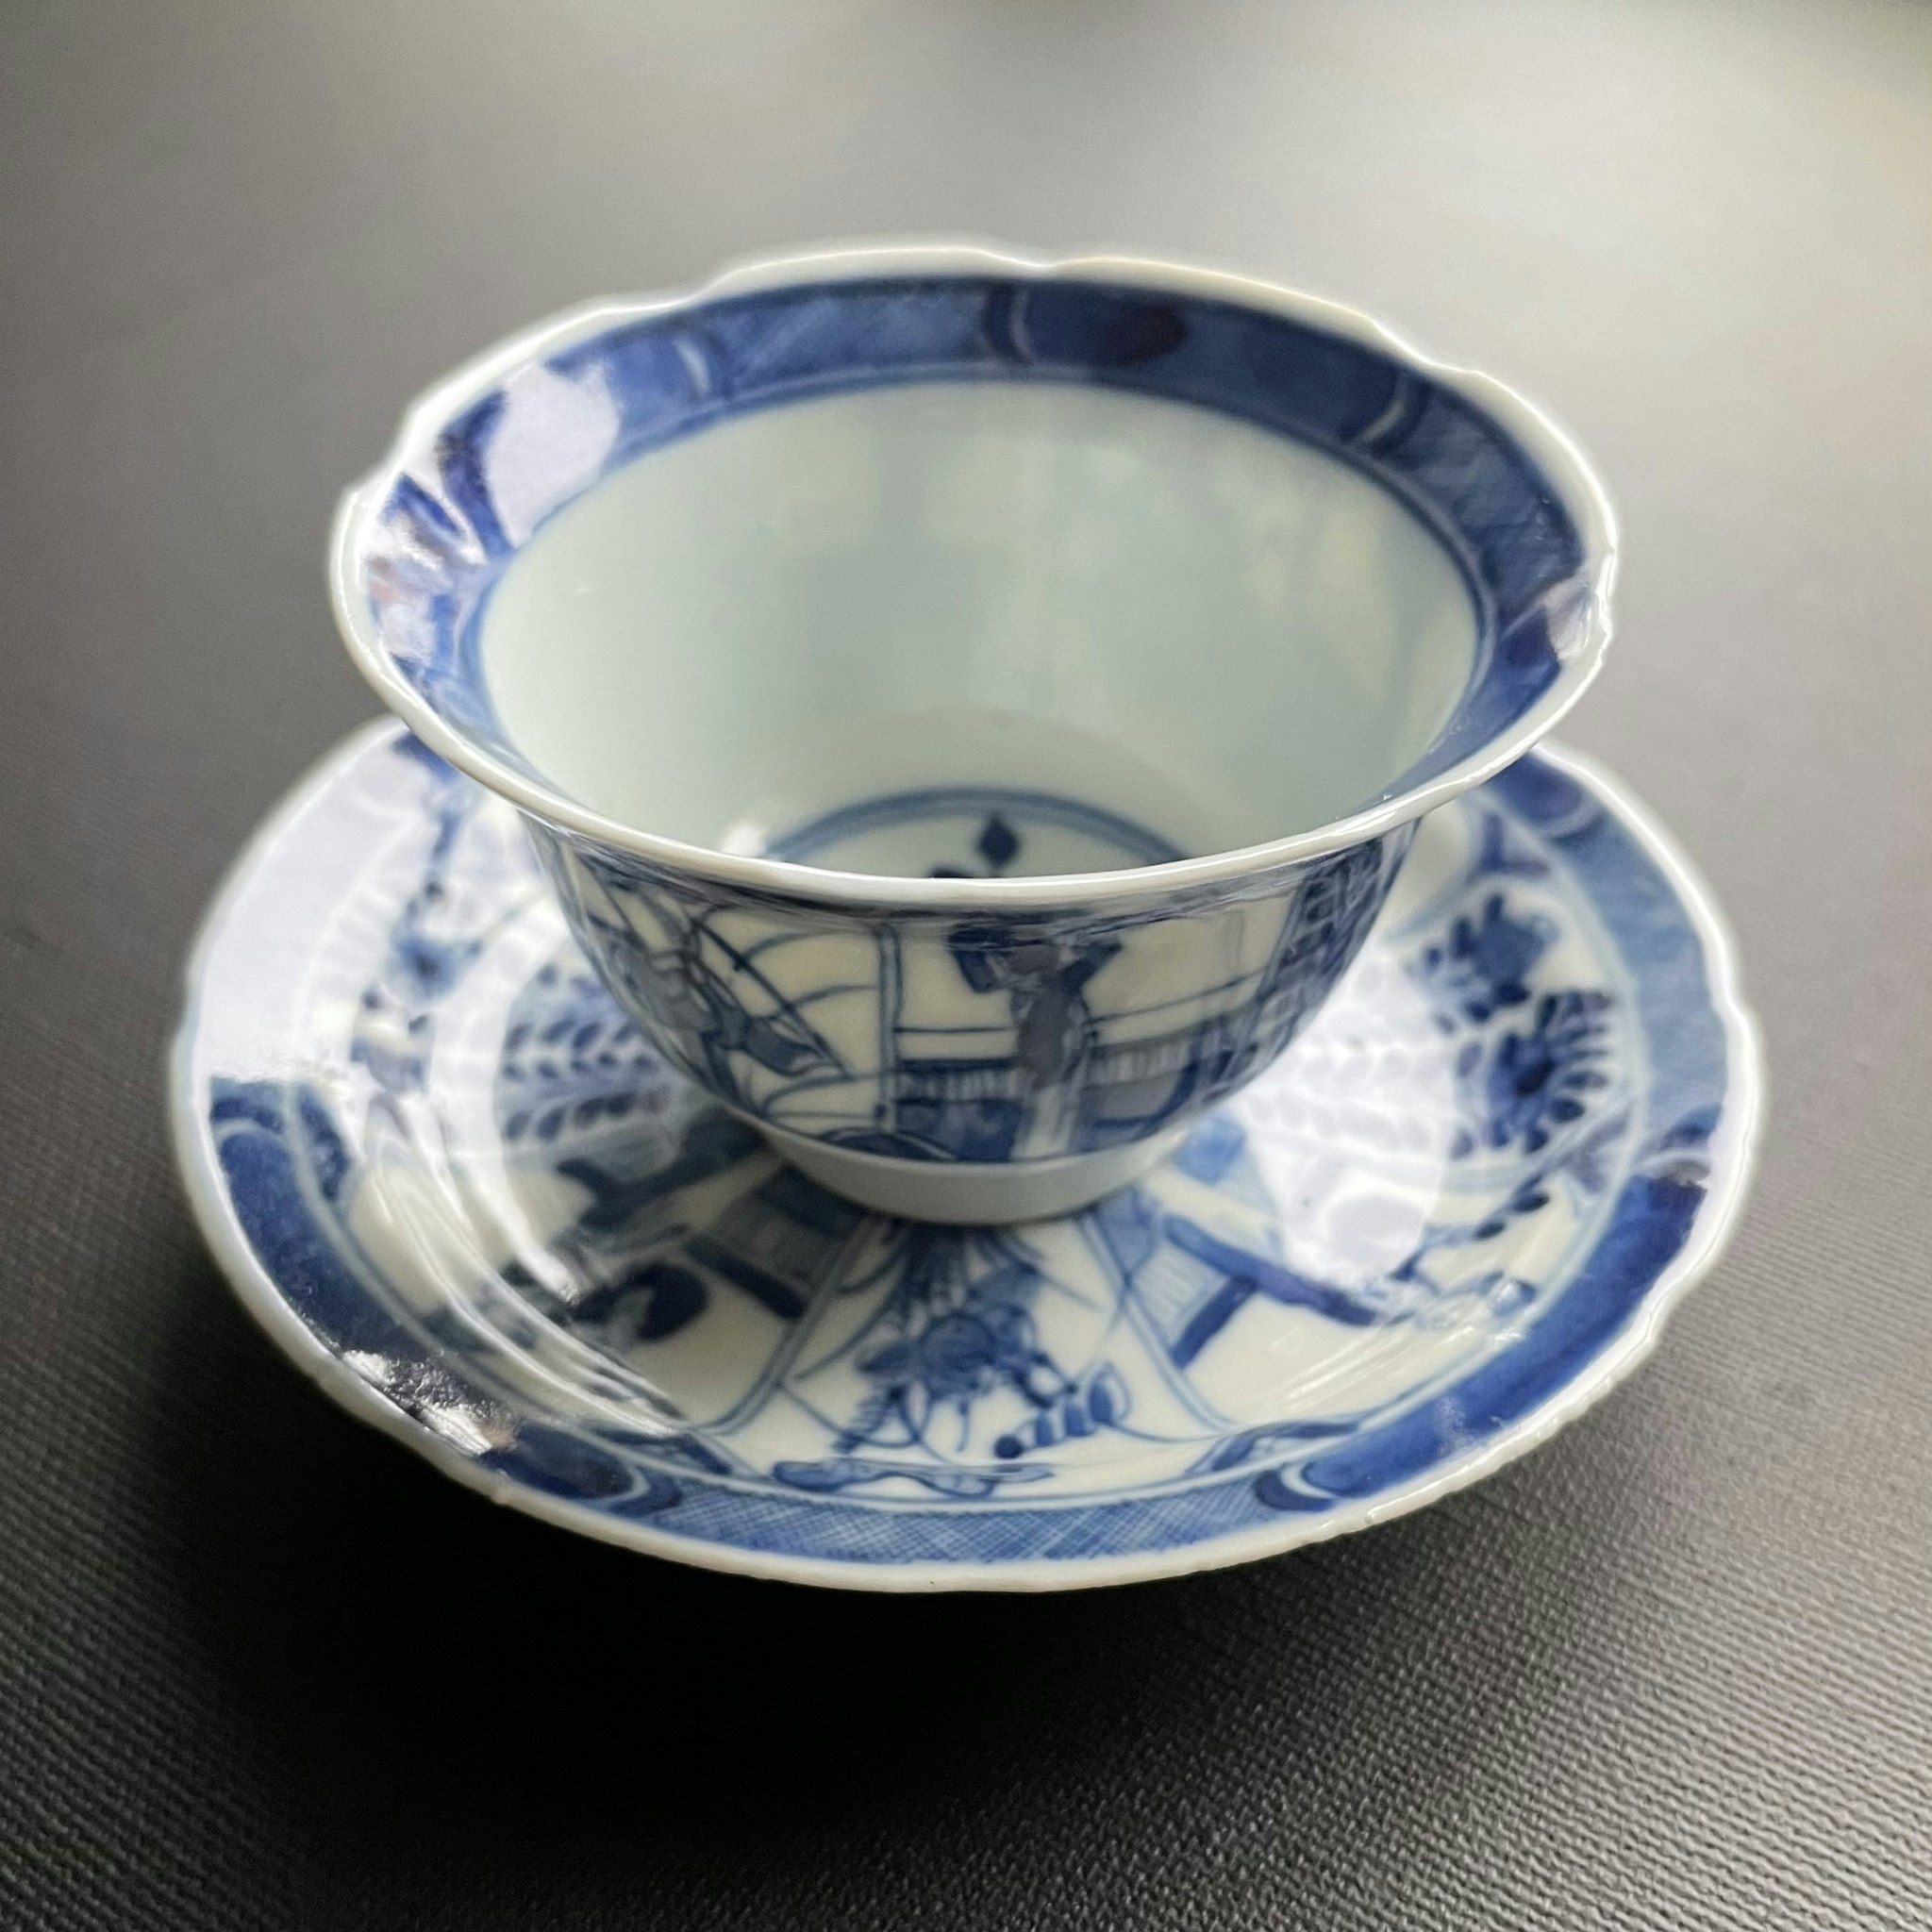 Antique Chinese Teacup & Saucer in underglazed blue & white, Late Qing #973, 975